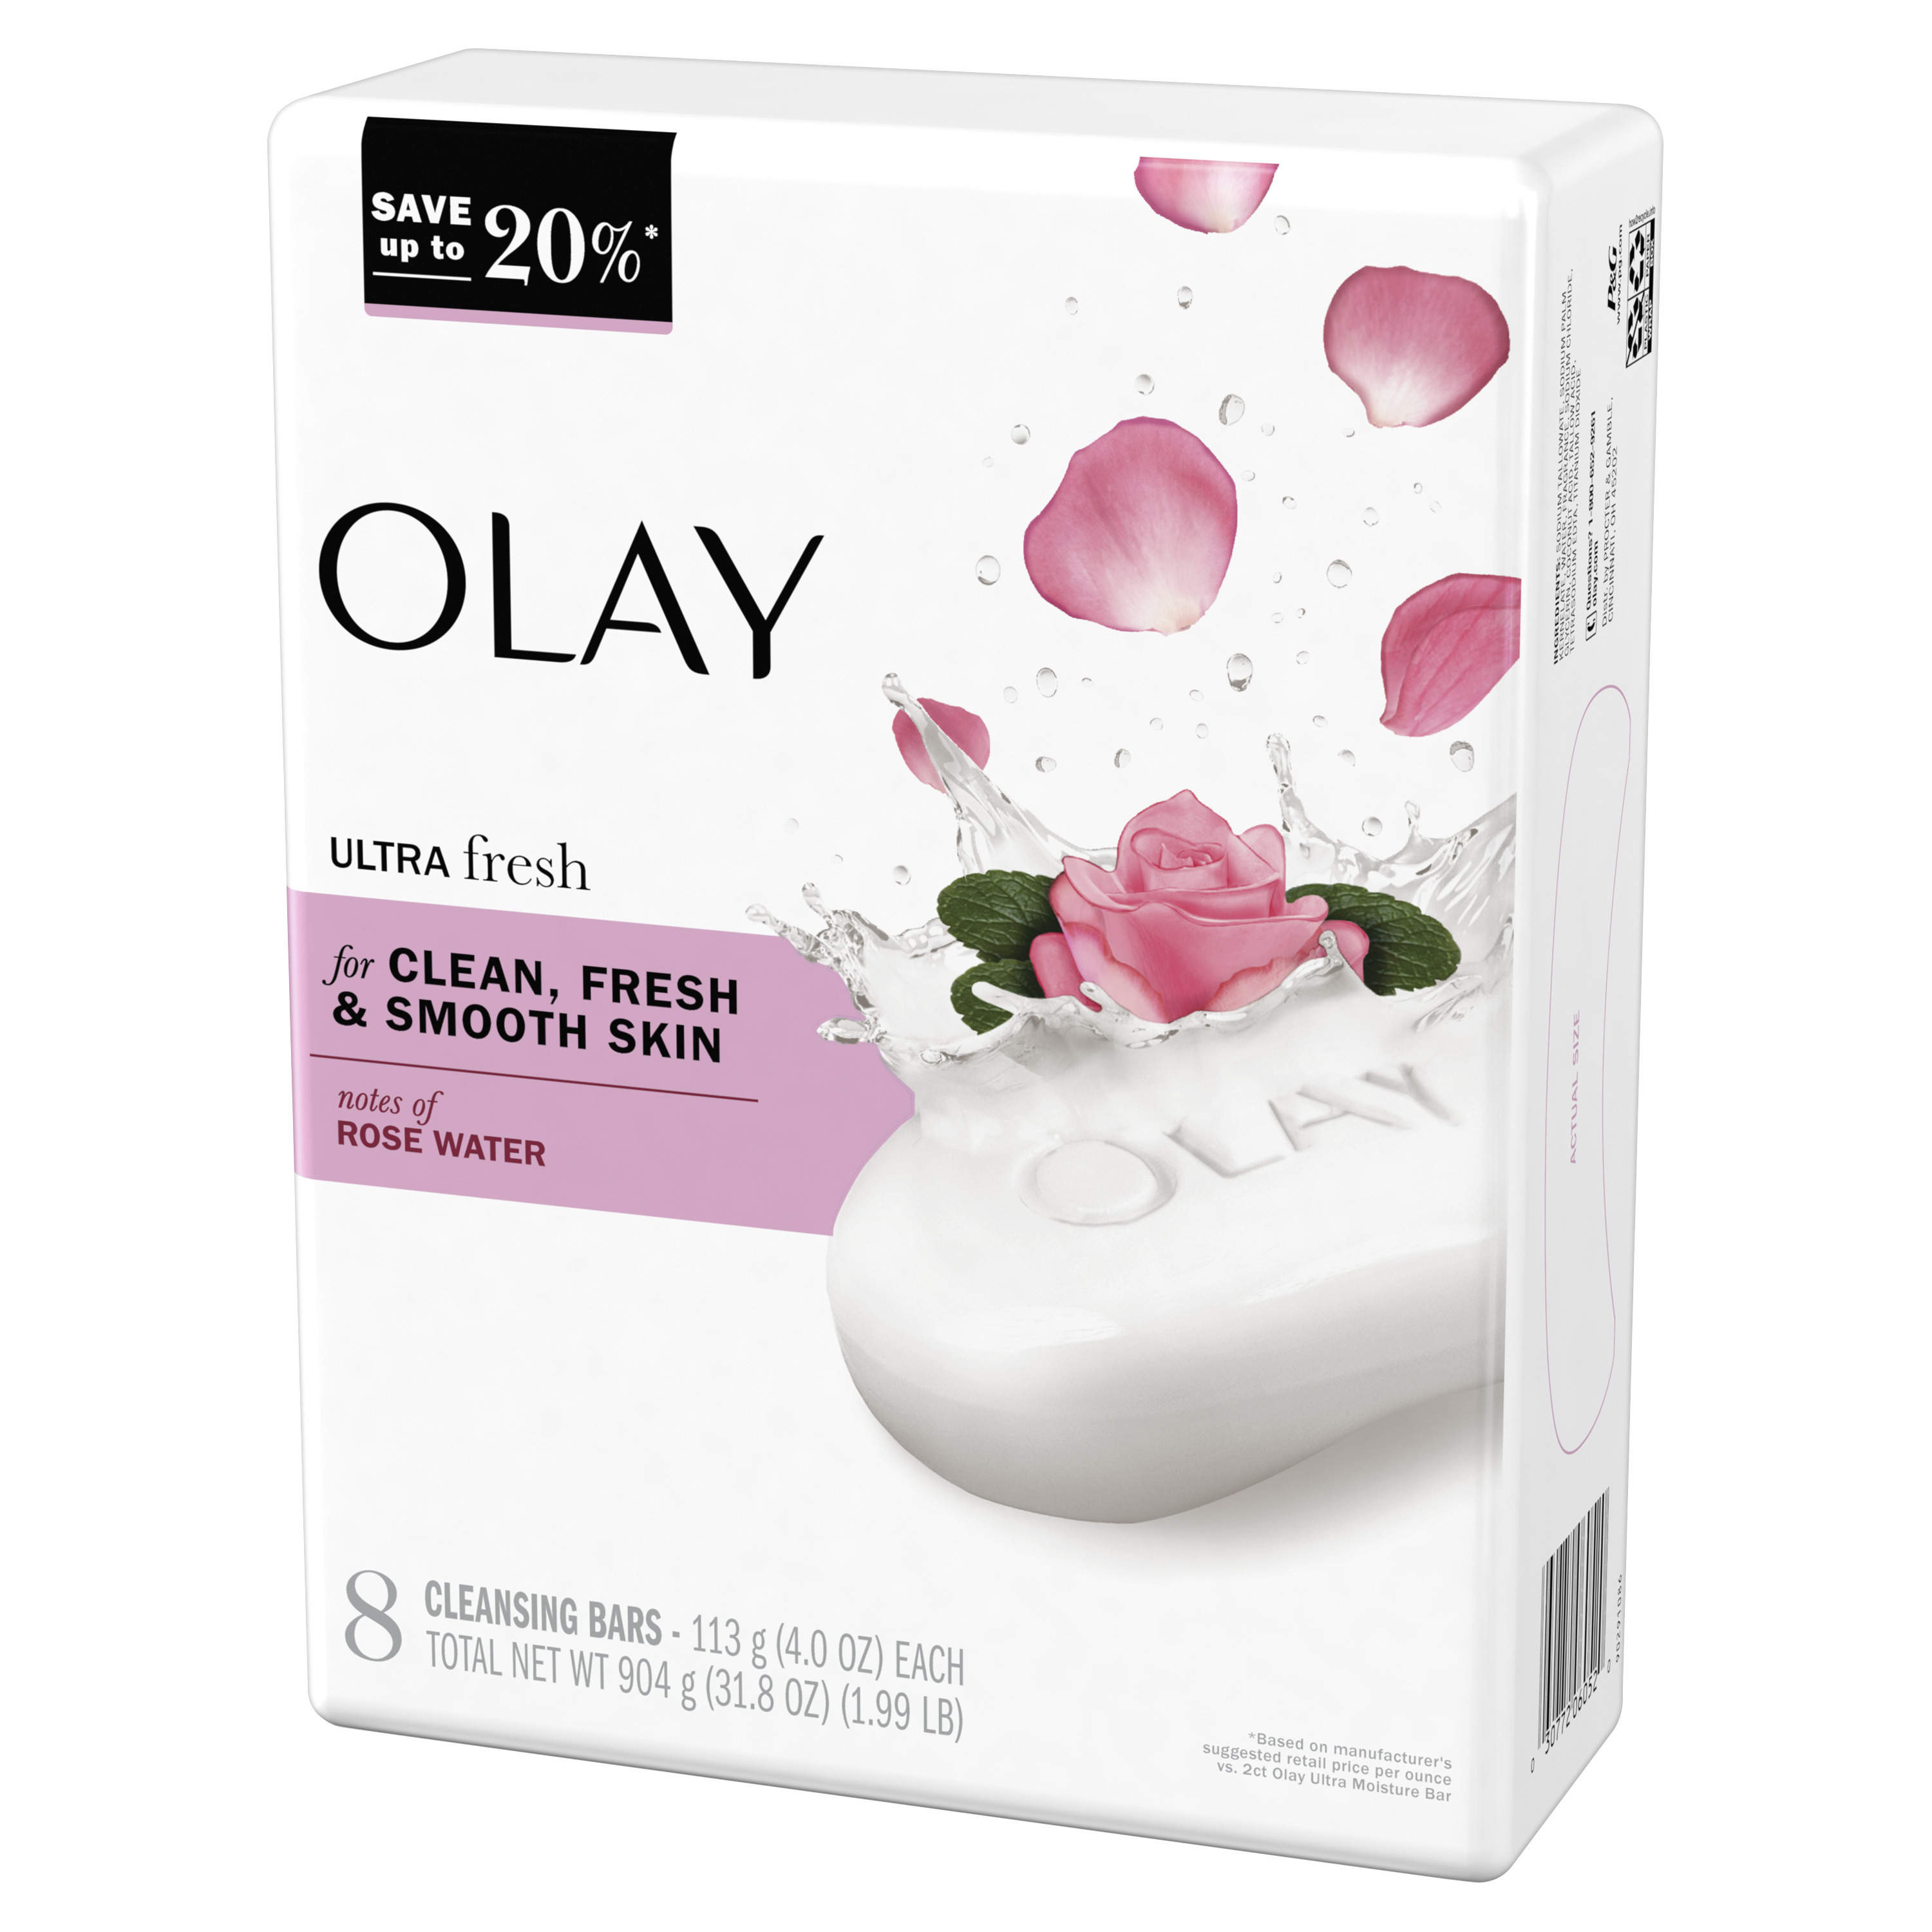 Olay Bath Bar with Notes of Rosewater 4 oz, 8 Count - image 3 of 7